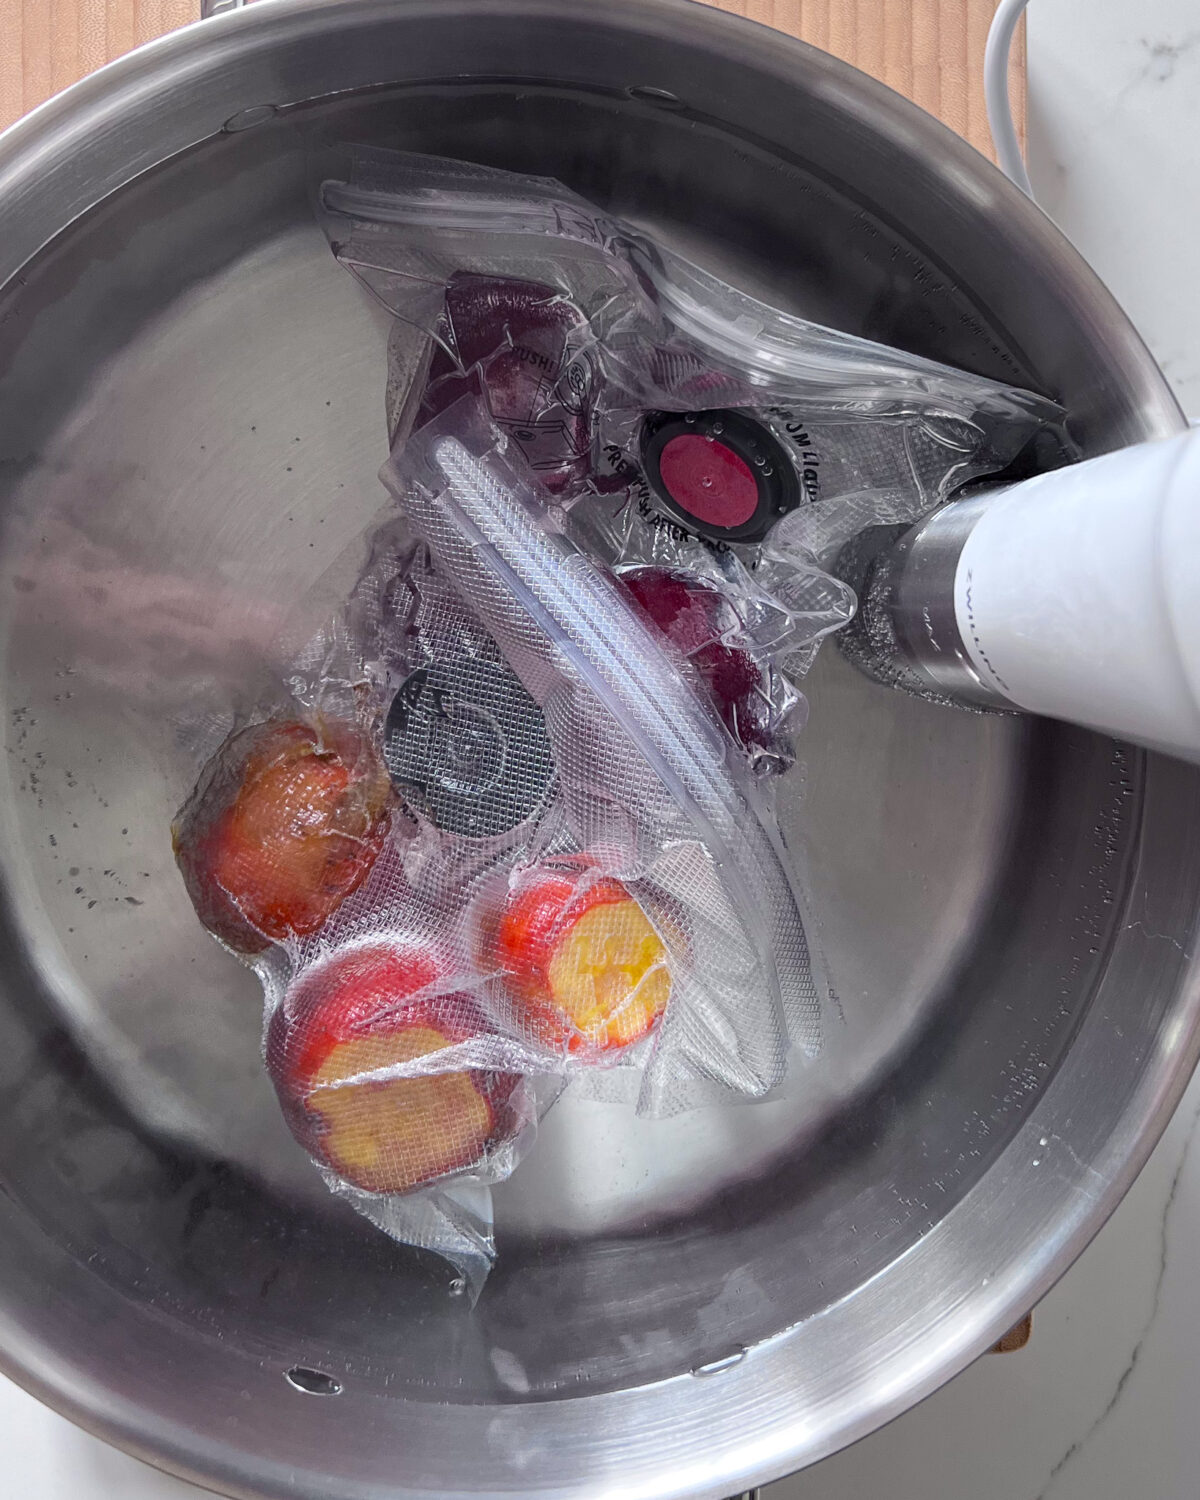 Beets are placed in a preheated water bath to make a sous-vide beet salad.